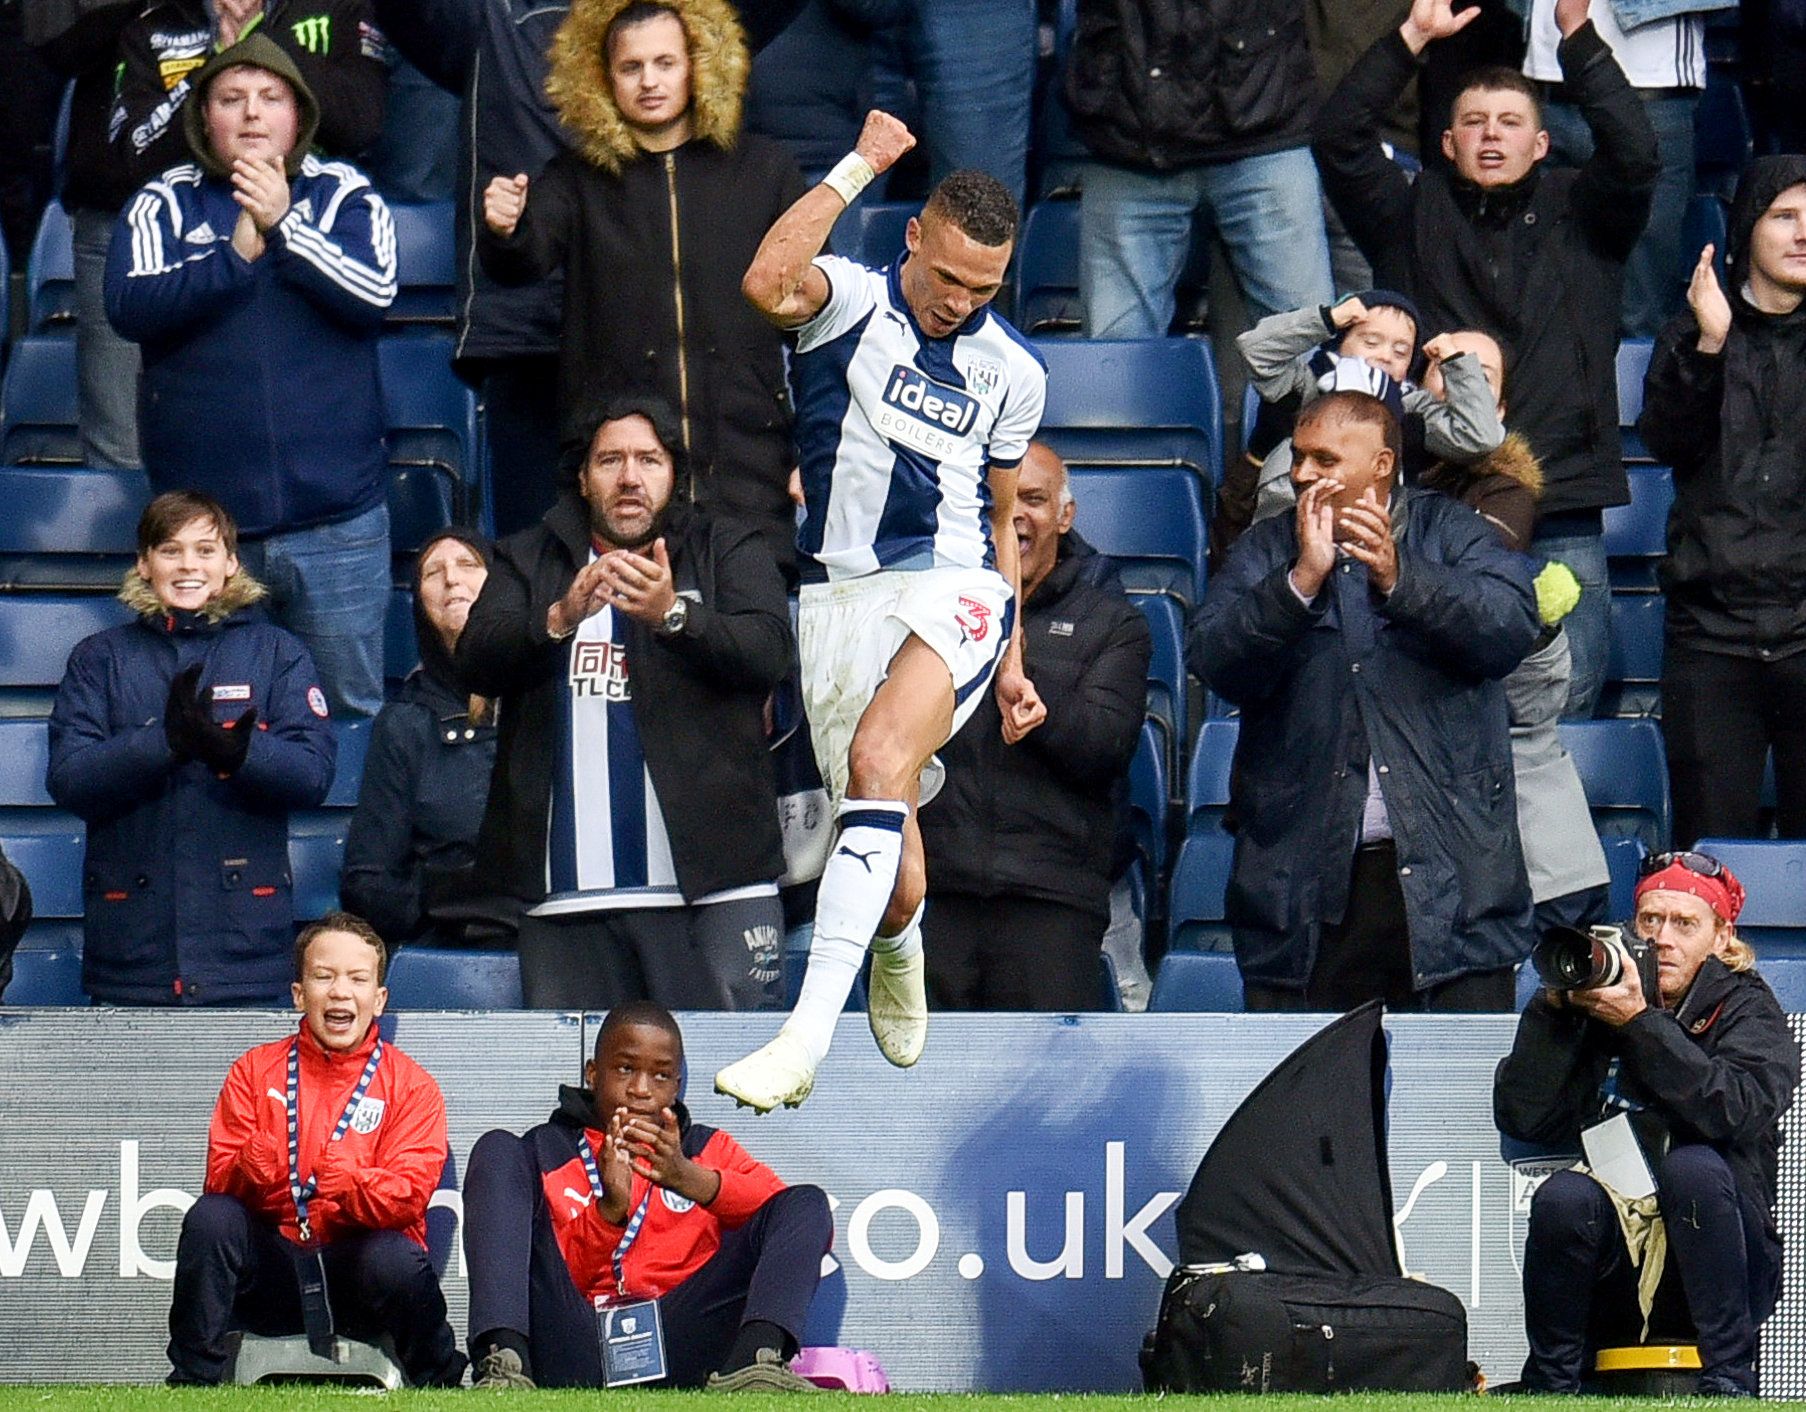 Soccer Football - Championship - West Bromwich Albion v Millwall - The Hawthorns, West Bromwich, Britain - September 22, 2018   West Bromwich Albion's Kieran Gibbs celebrates scoring their second goal     Action Images/Paul Burrows    EDITORIAL USE ONLY. No use with unauthorized audio, video, data, fixture lists, club/league logos or 